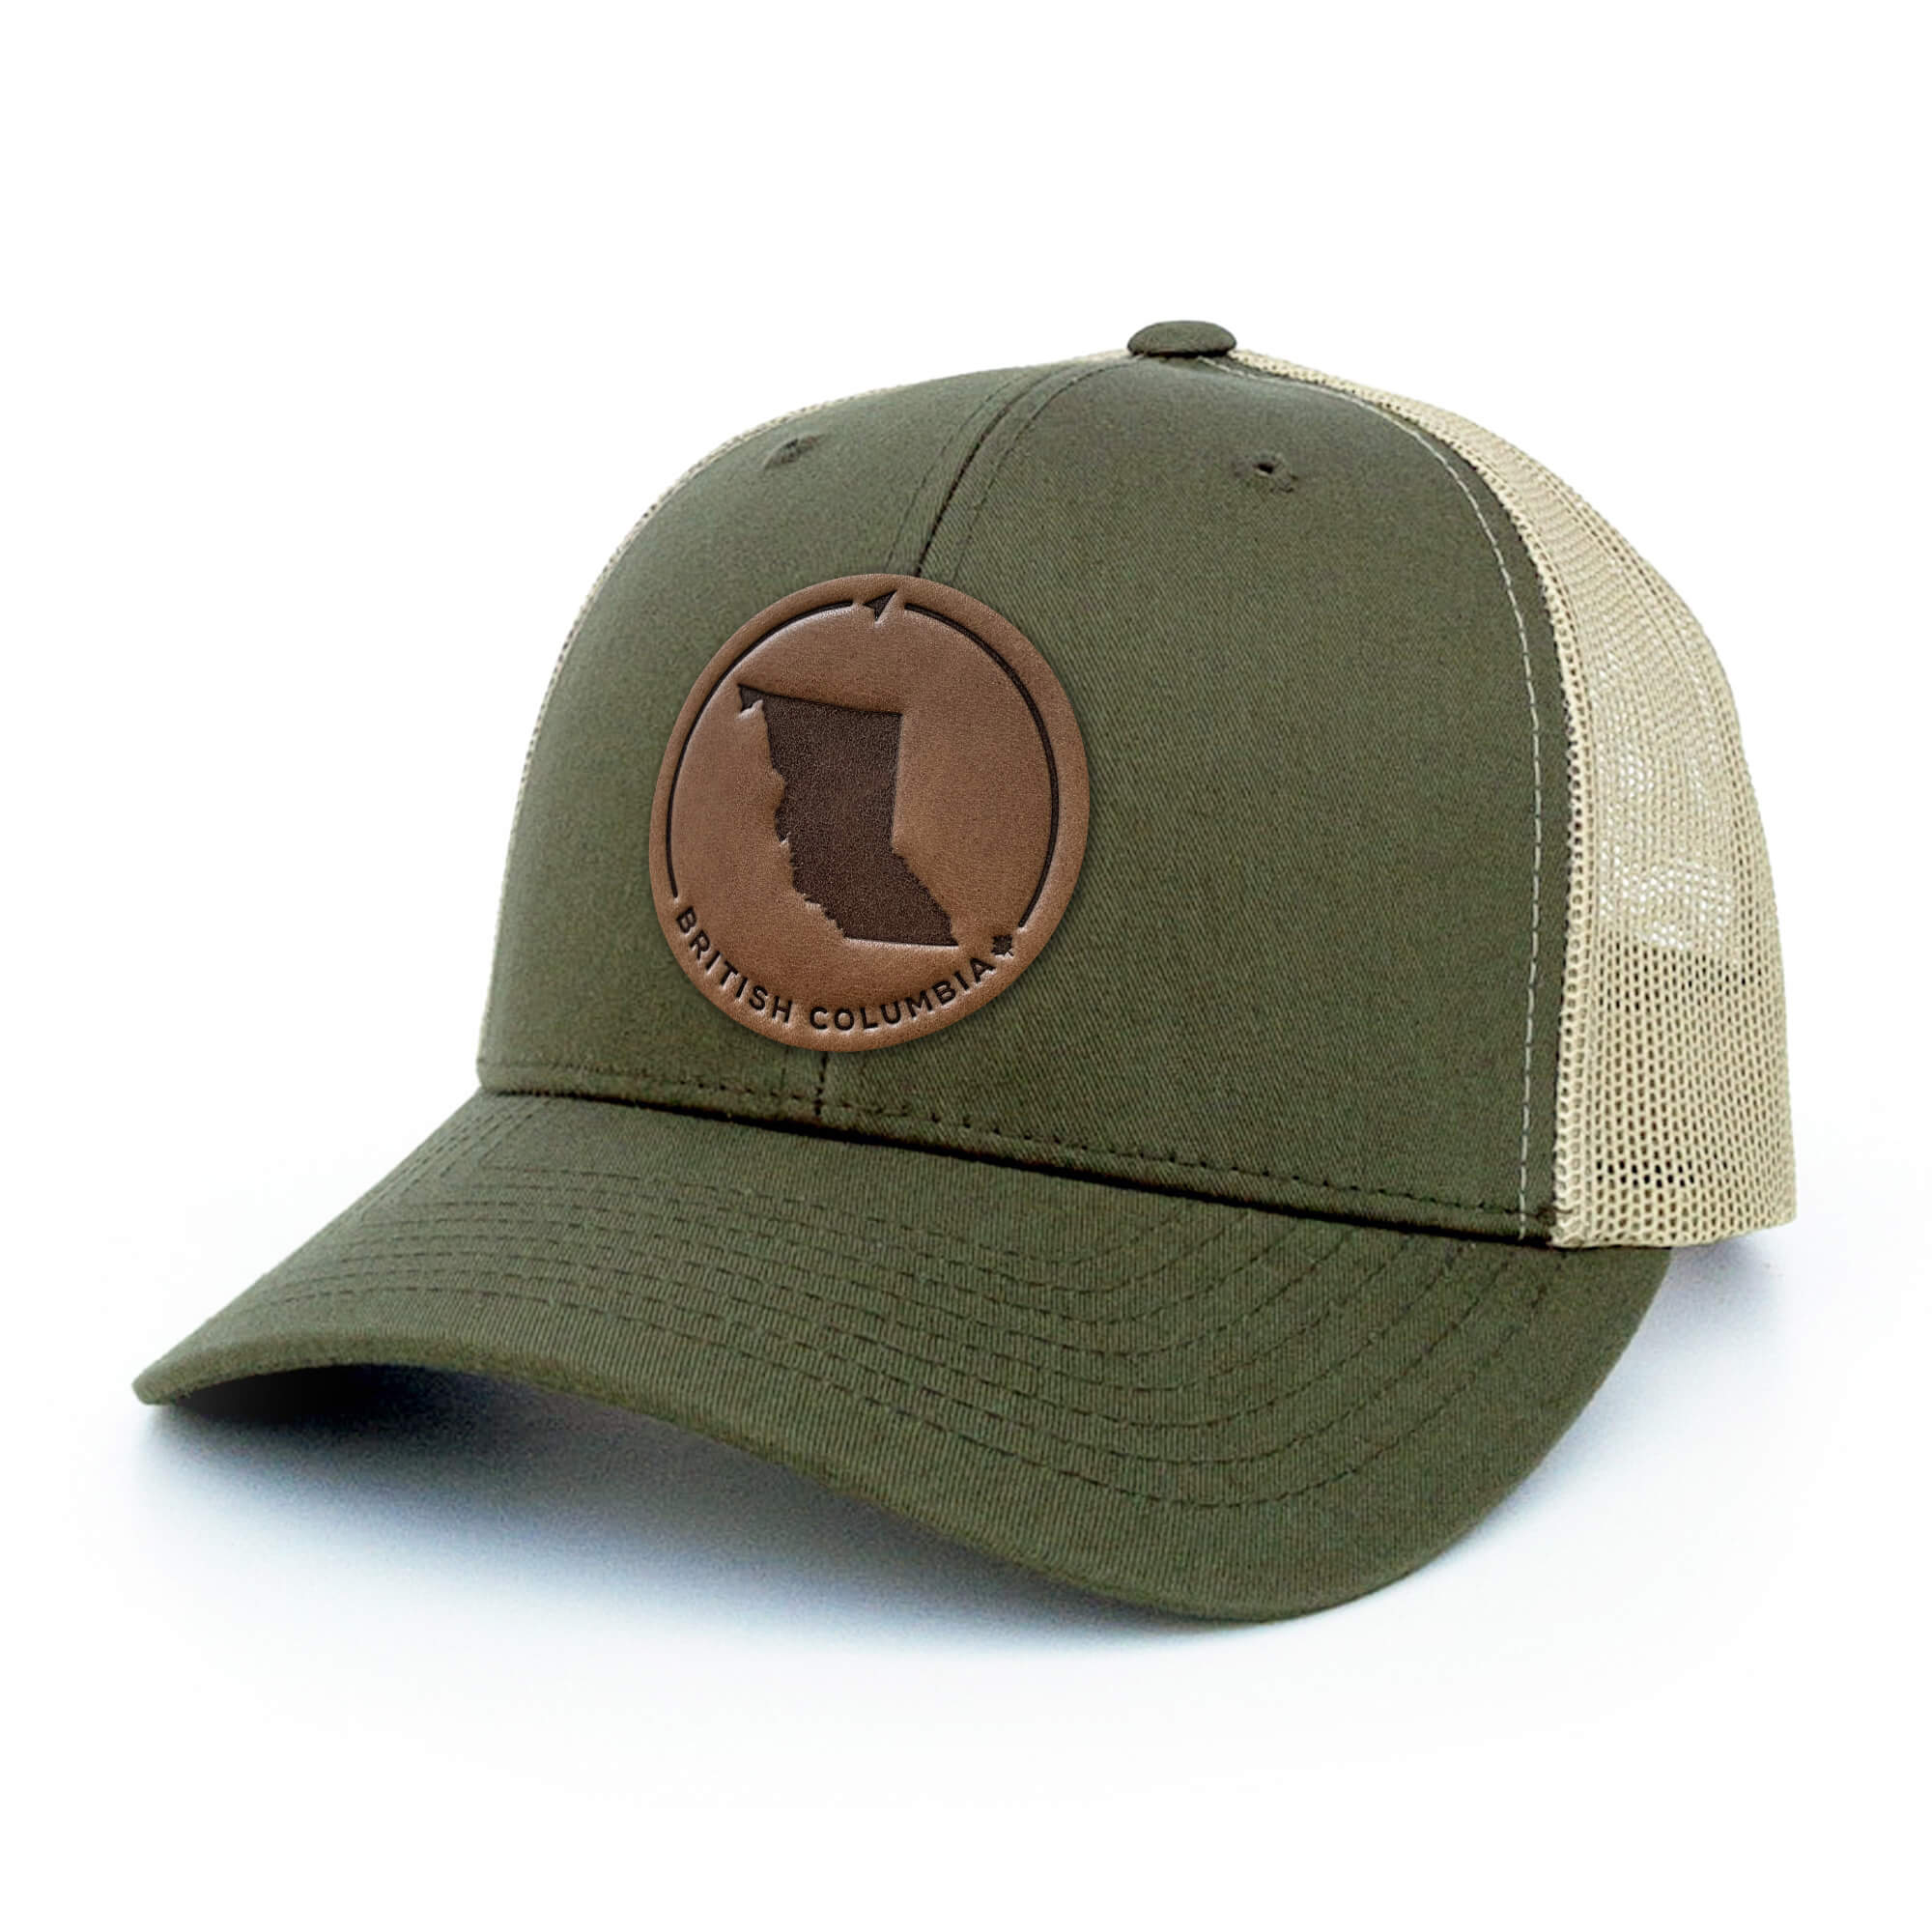 Moss khaki trucker hat with full-grain leather patch of British Columbia | BLACK-002-004, CHARC-002-004, NAVY-002-004, HGREY-002-004, MOSS-002-004, BROWN-002-004